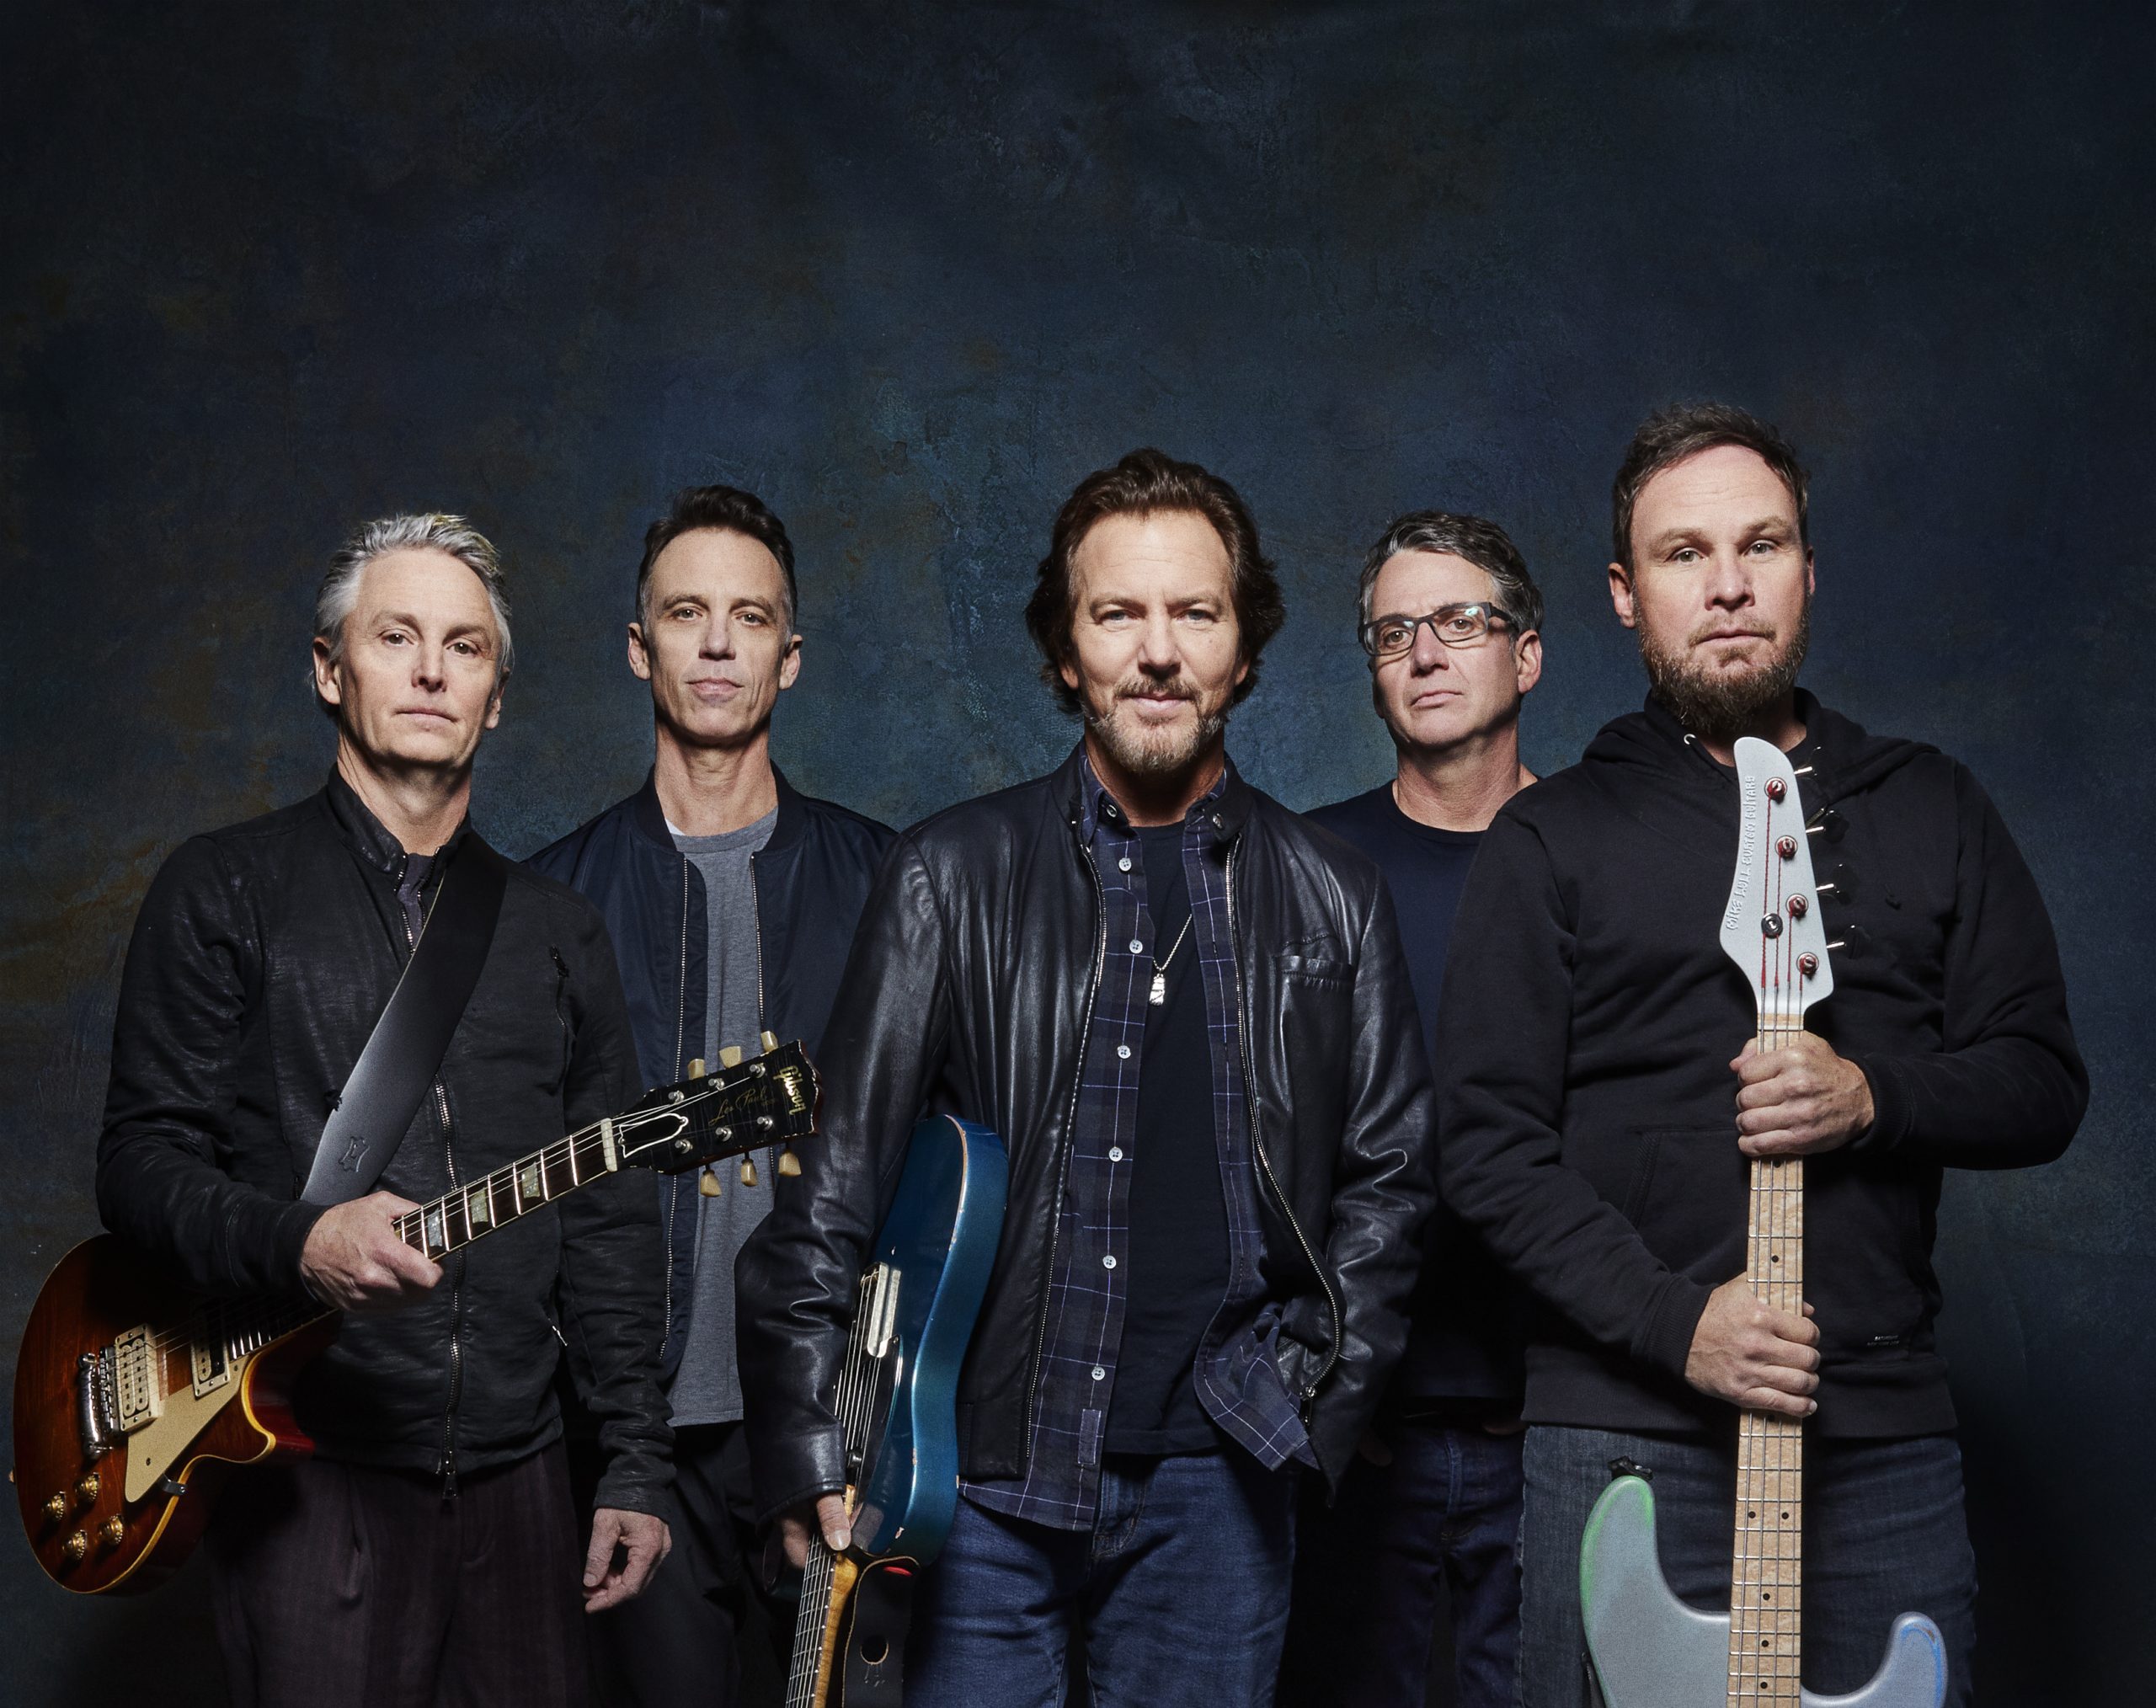 PEARL JAM release a brand-new song 'Quick Escape' in advance of new album 